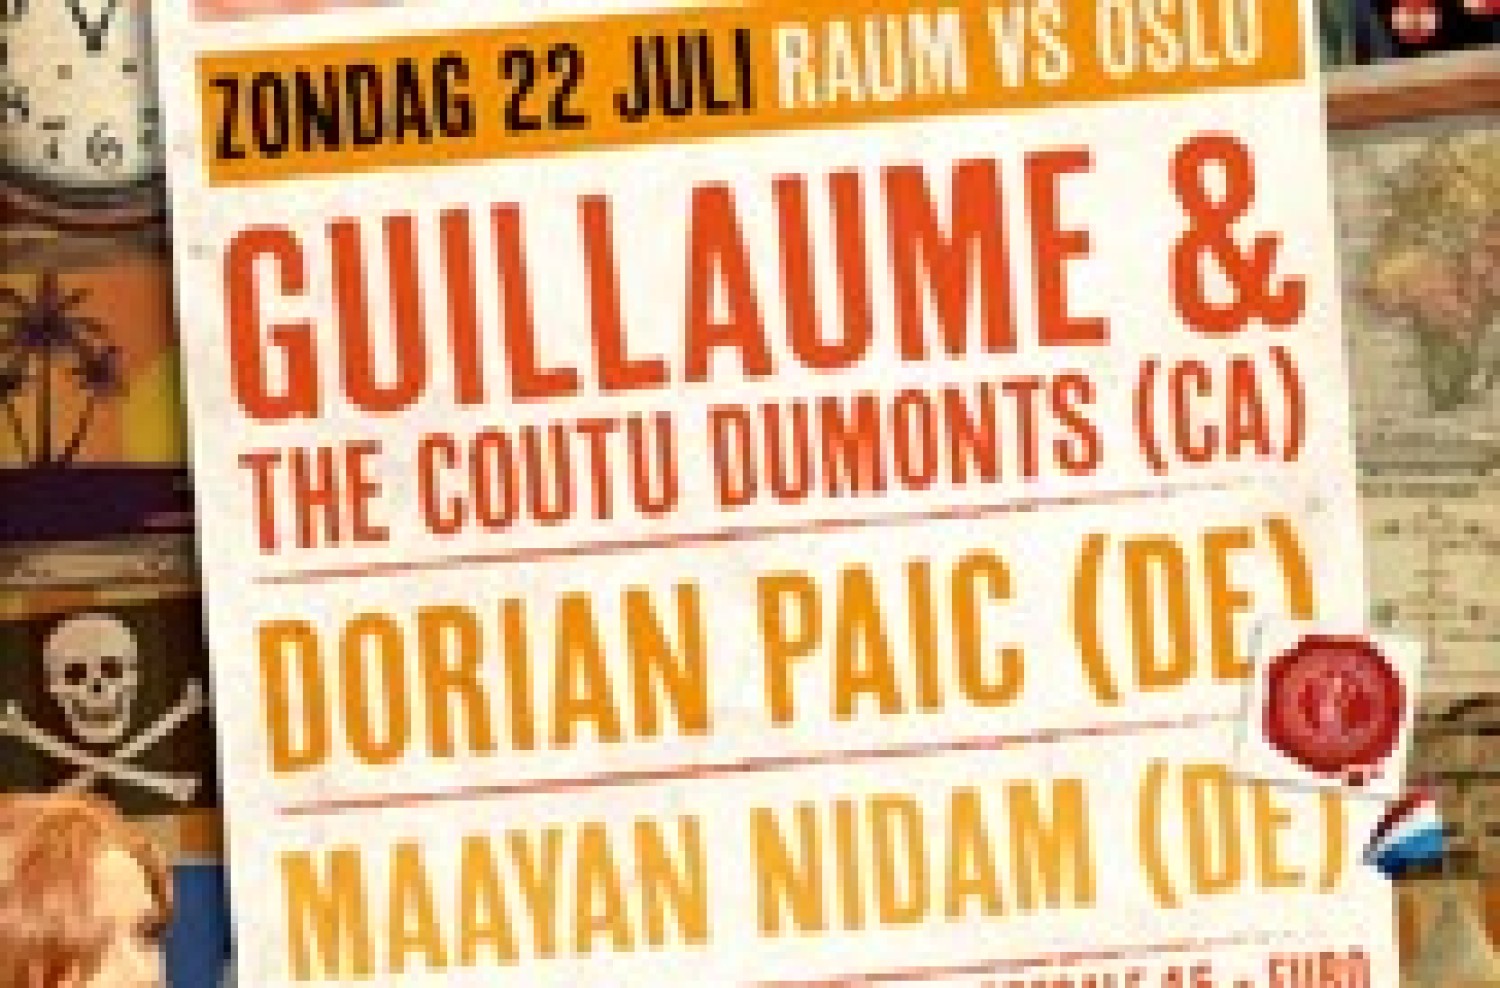 Party nieuws: WLC presents Guillaume & The Coutu Dumonts